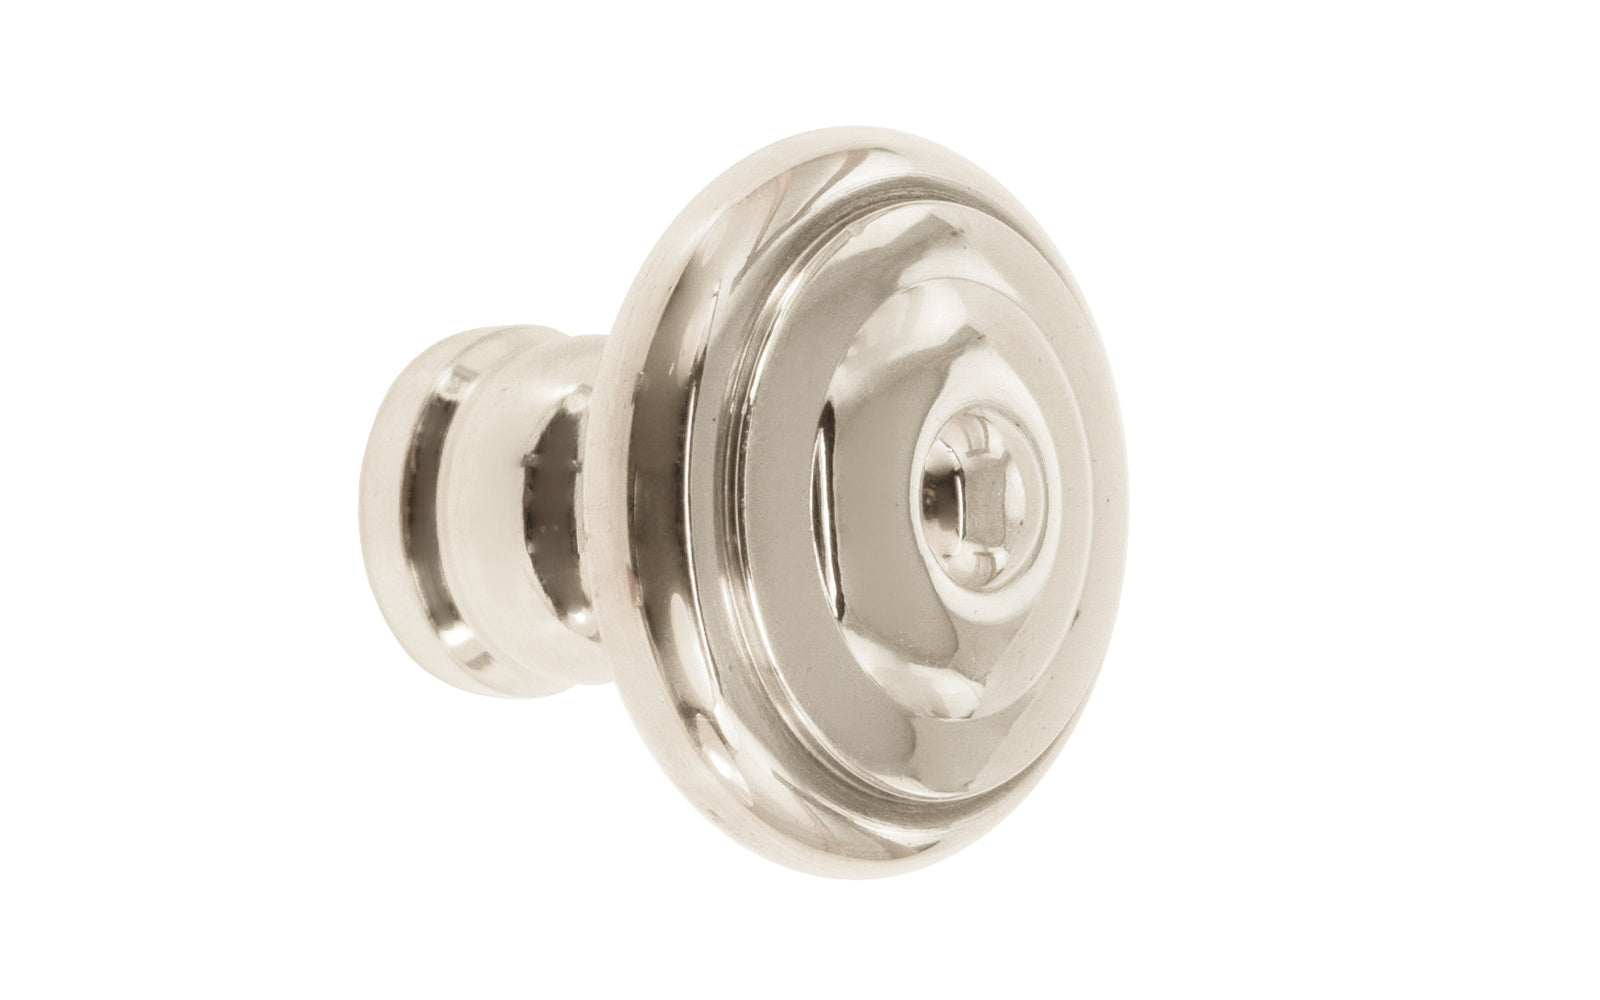 Vintage-style Hardware · Solid Brass classic contemporary style cabinet knob designed in the Mid-Century style. Quality solid brass 1-1/4" diameter Knob. Ideal for kitchen & bathroom cabinets, & furniture. Polished nickel finish.